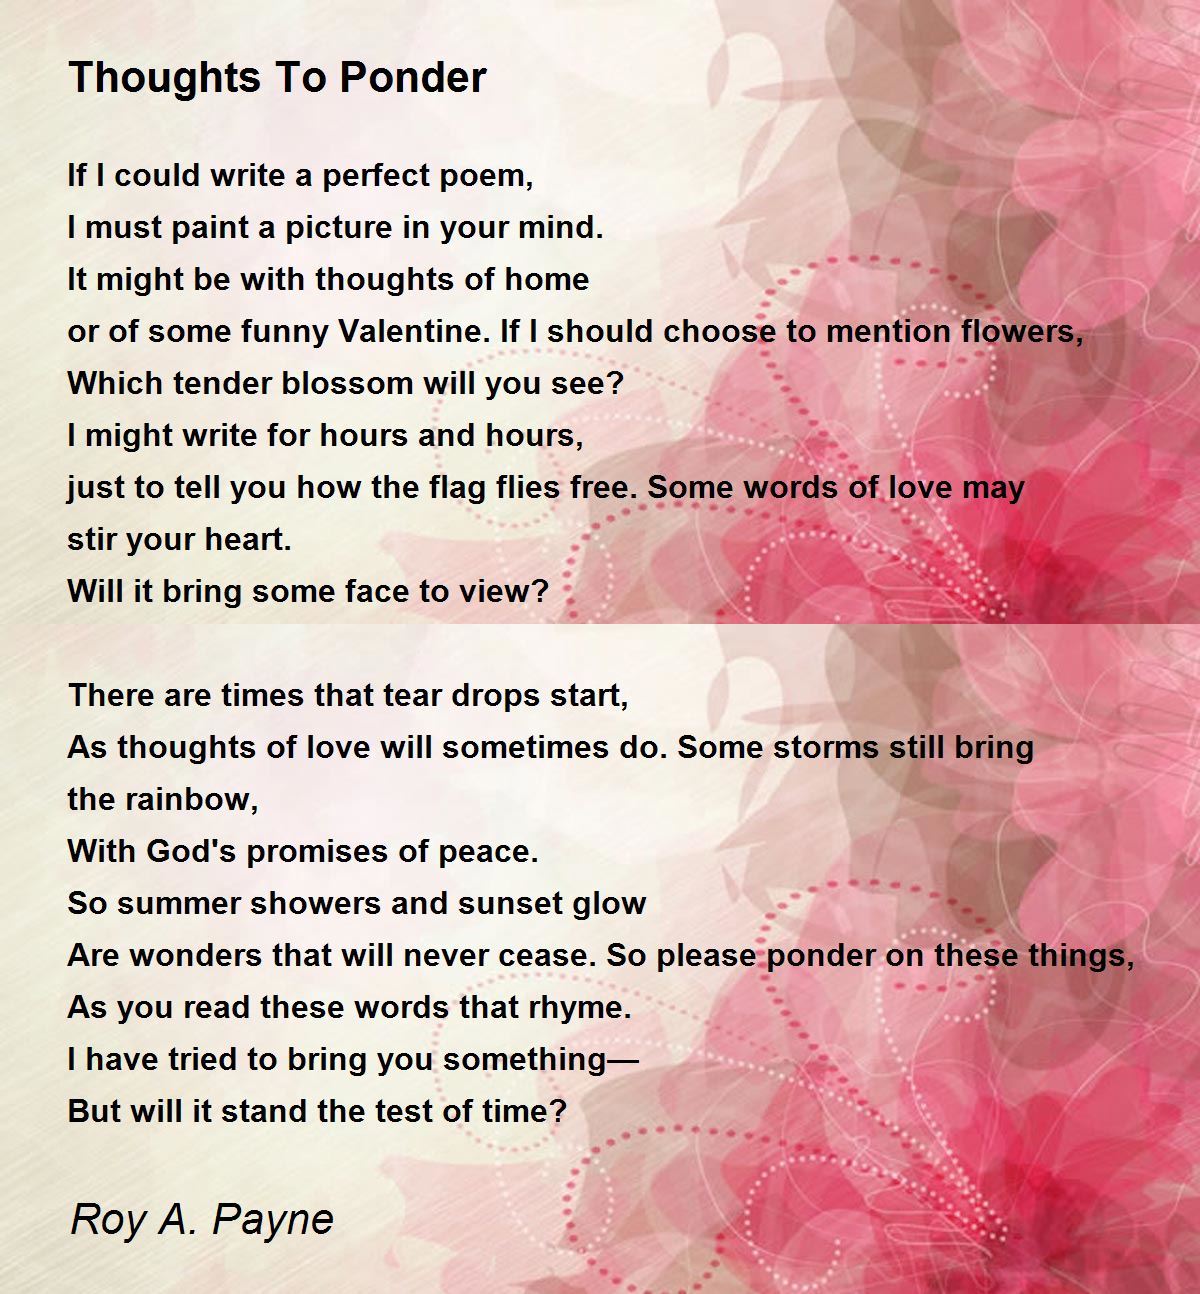 Thoughts To Ponder - Thoughts To Ponder Poem by Roy A. Payne